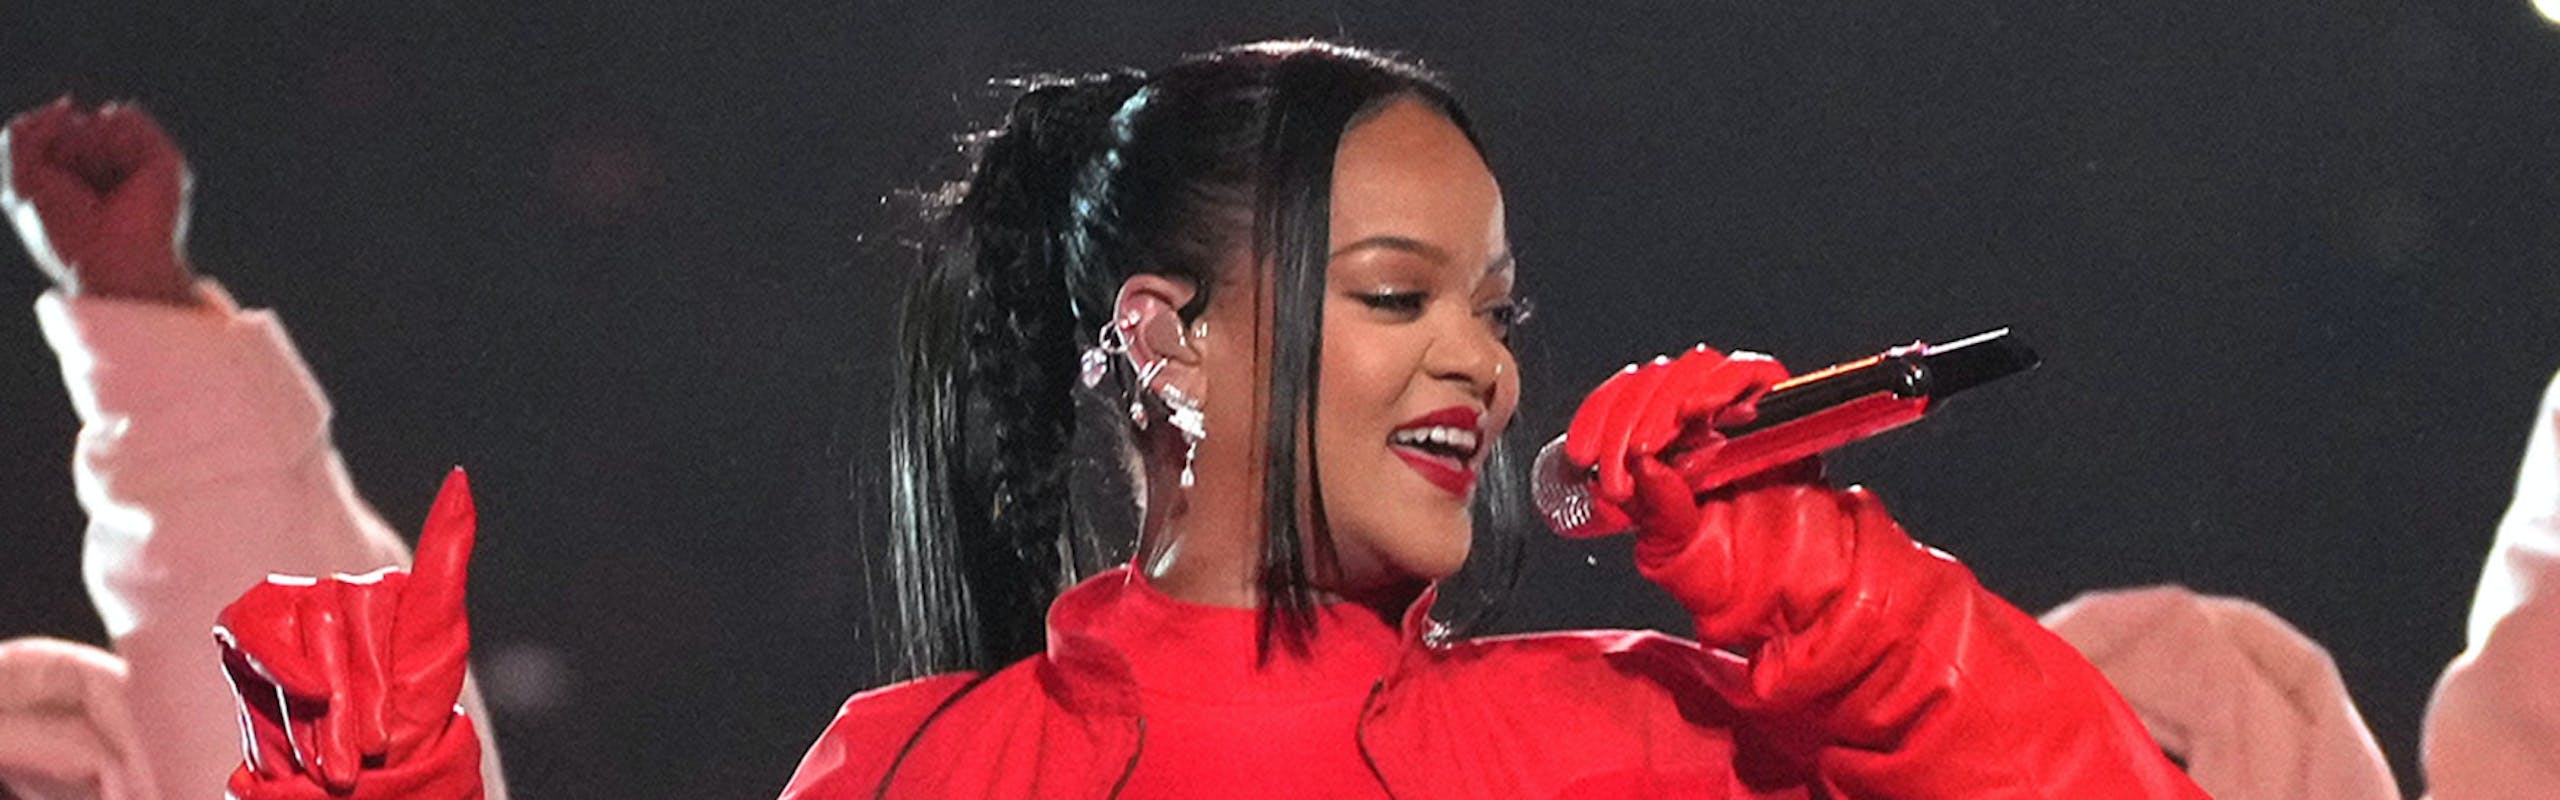 Rihanna performing at the Super Bowl Halftime show in 2023. Photo: Getty Images.